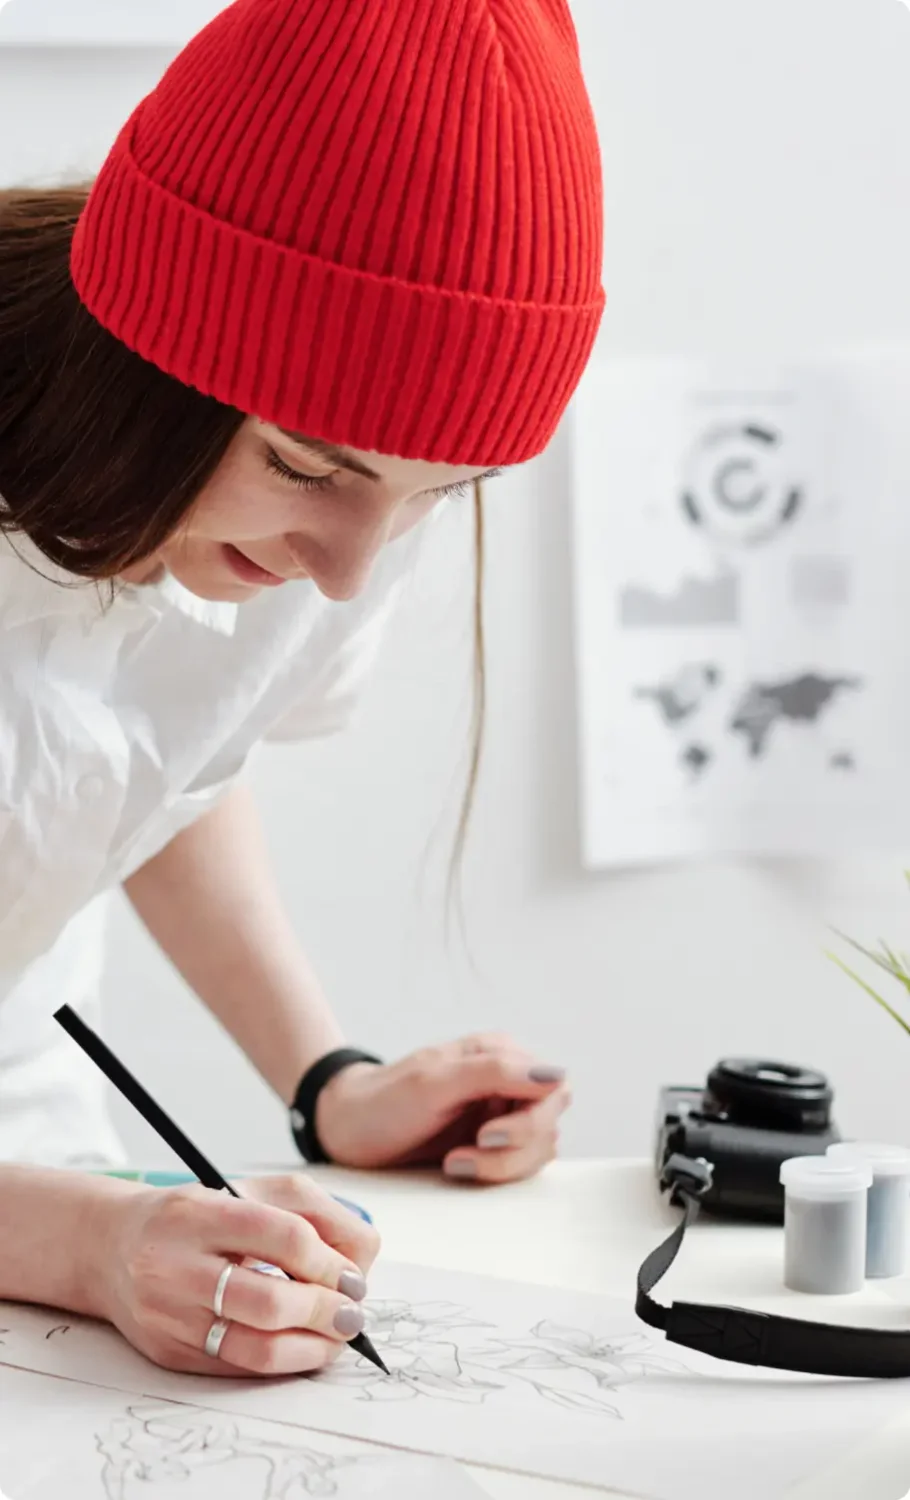 Woman in a shirt and red beanie writes with a pencil on her desk.